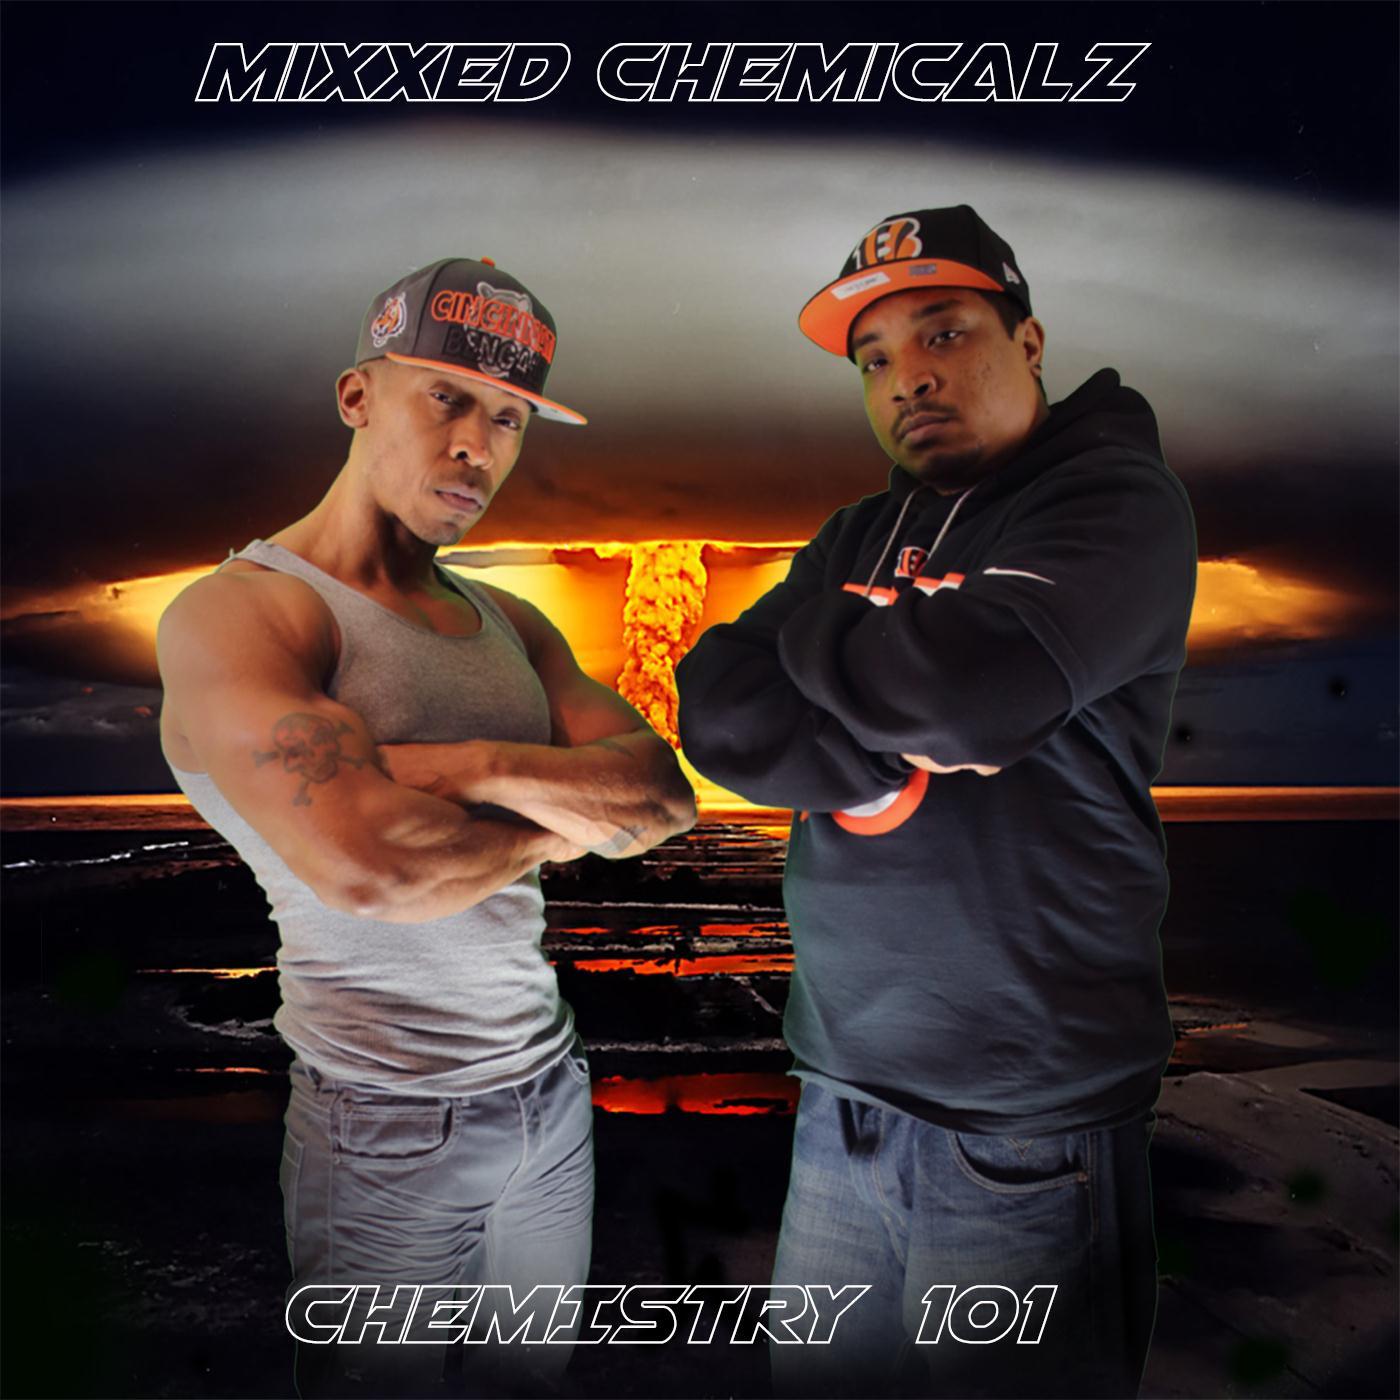 Mixxed Chemicalz - Who You F'n With